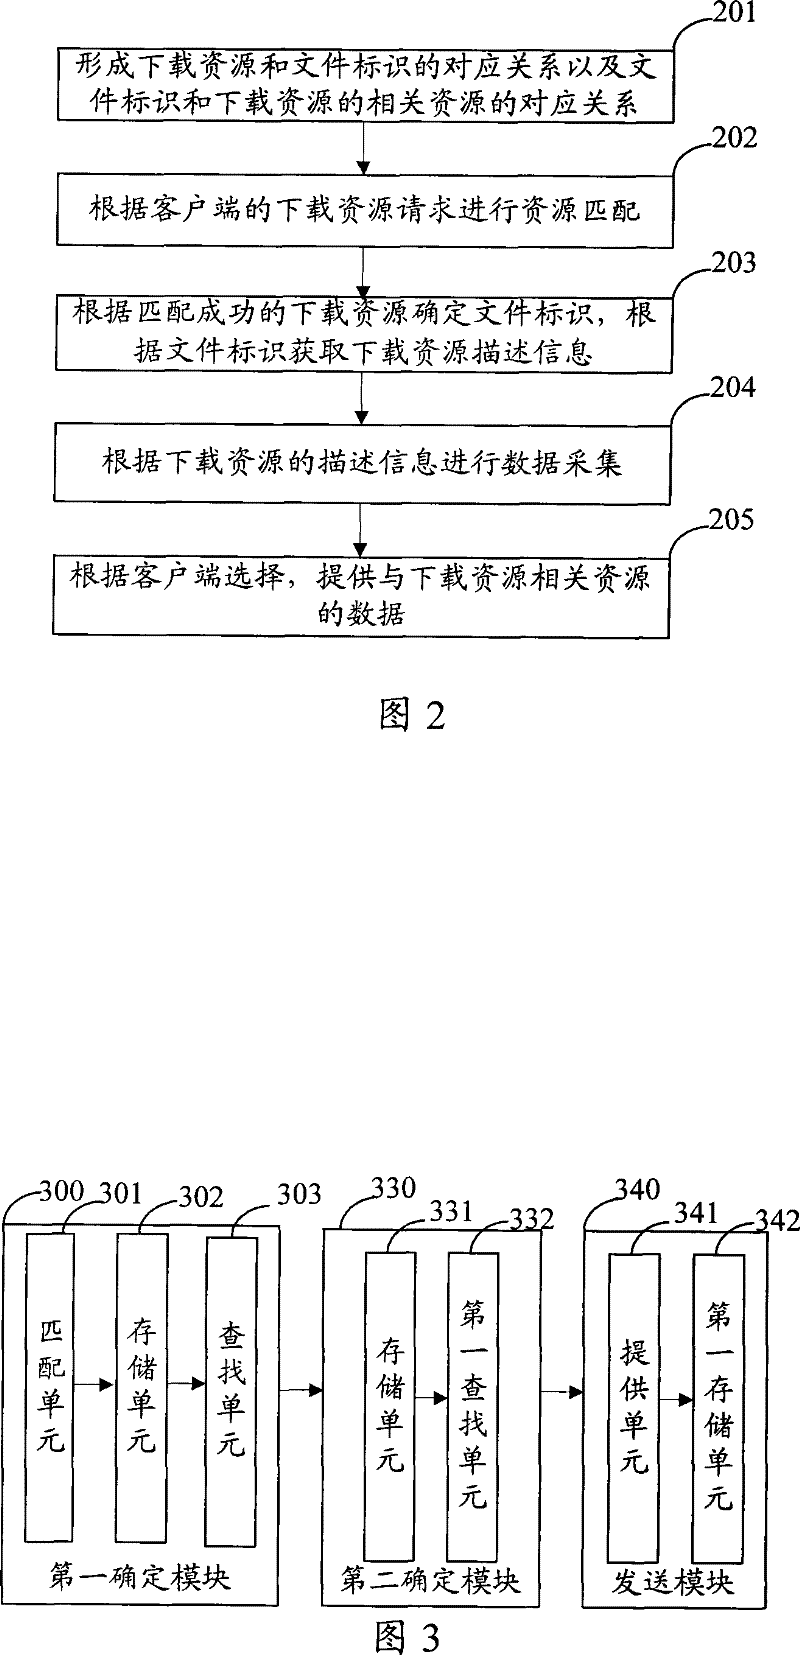 A download method, system and device